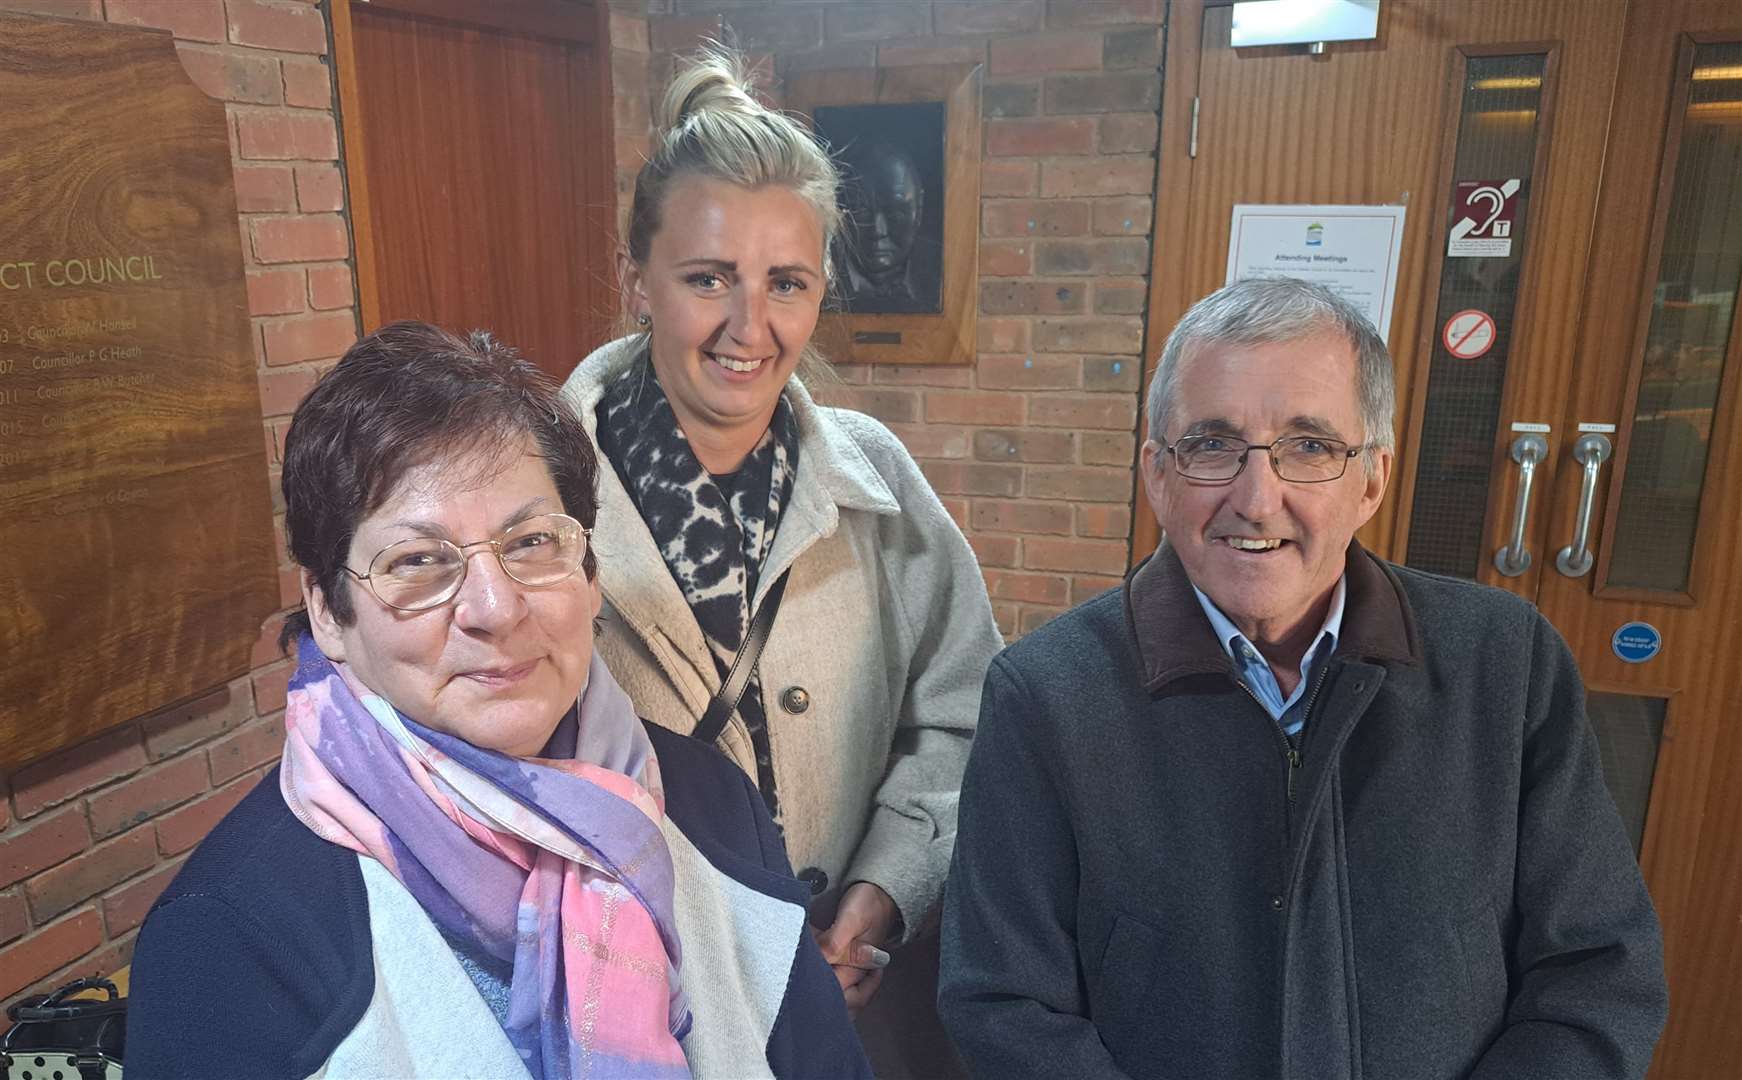 Three of those supporting the application for the Crown Inn at Finglesham – manager Michaela Hubble, licensee Amy Beaney and villager Anthony Wells